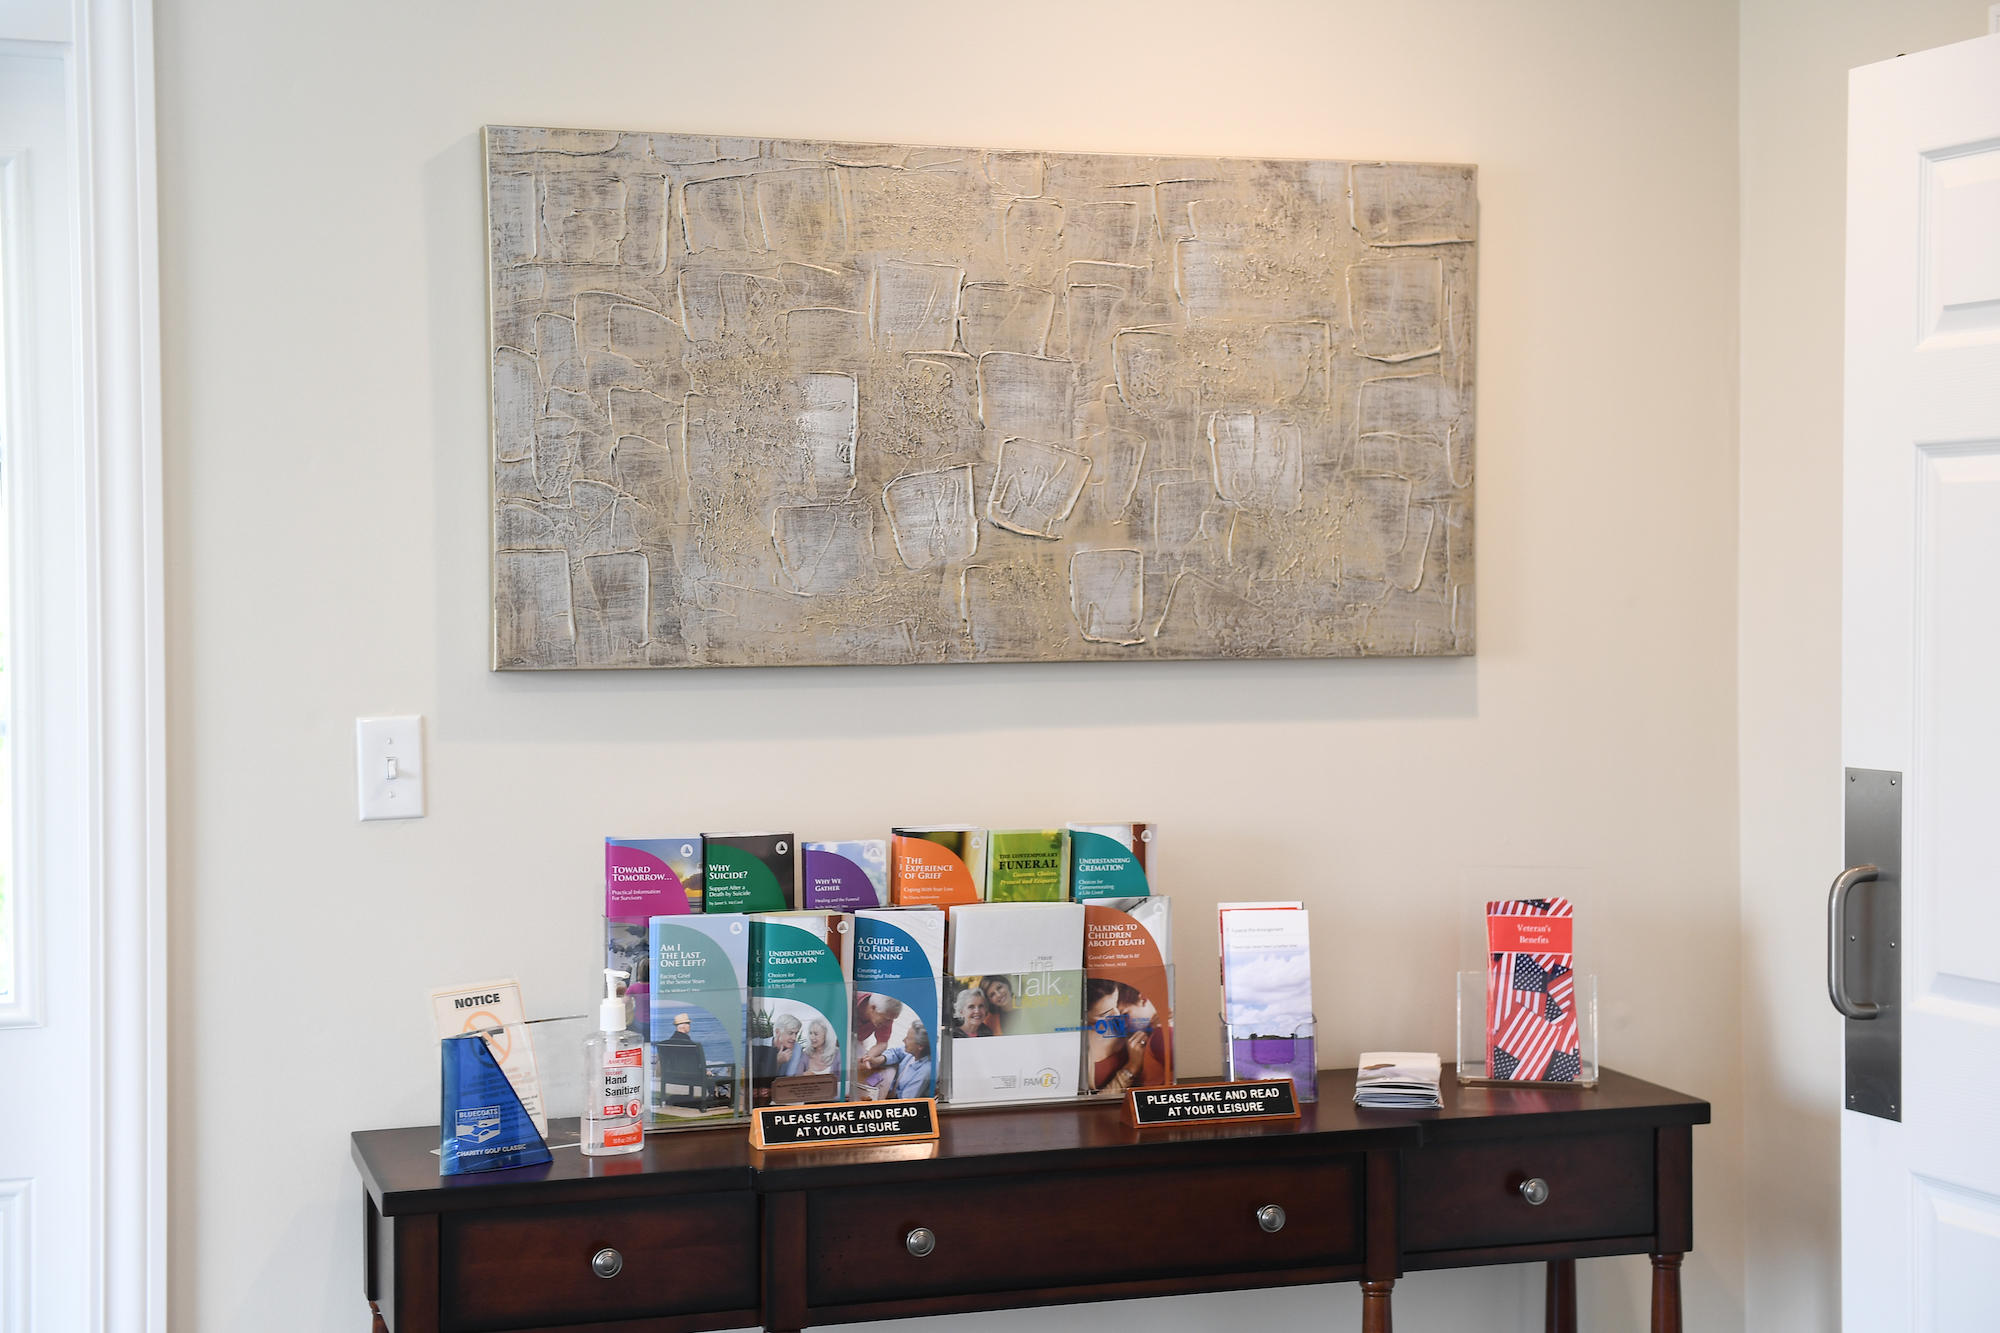 Our funeral home features art that makes it a comfortable space.